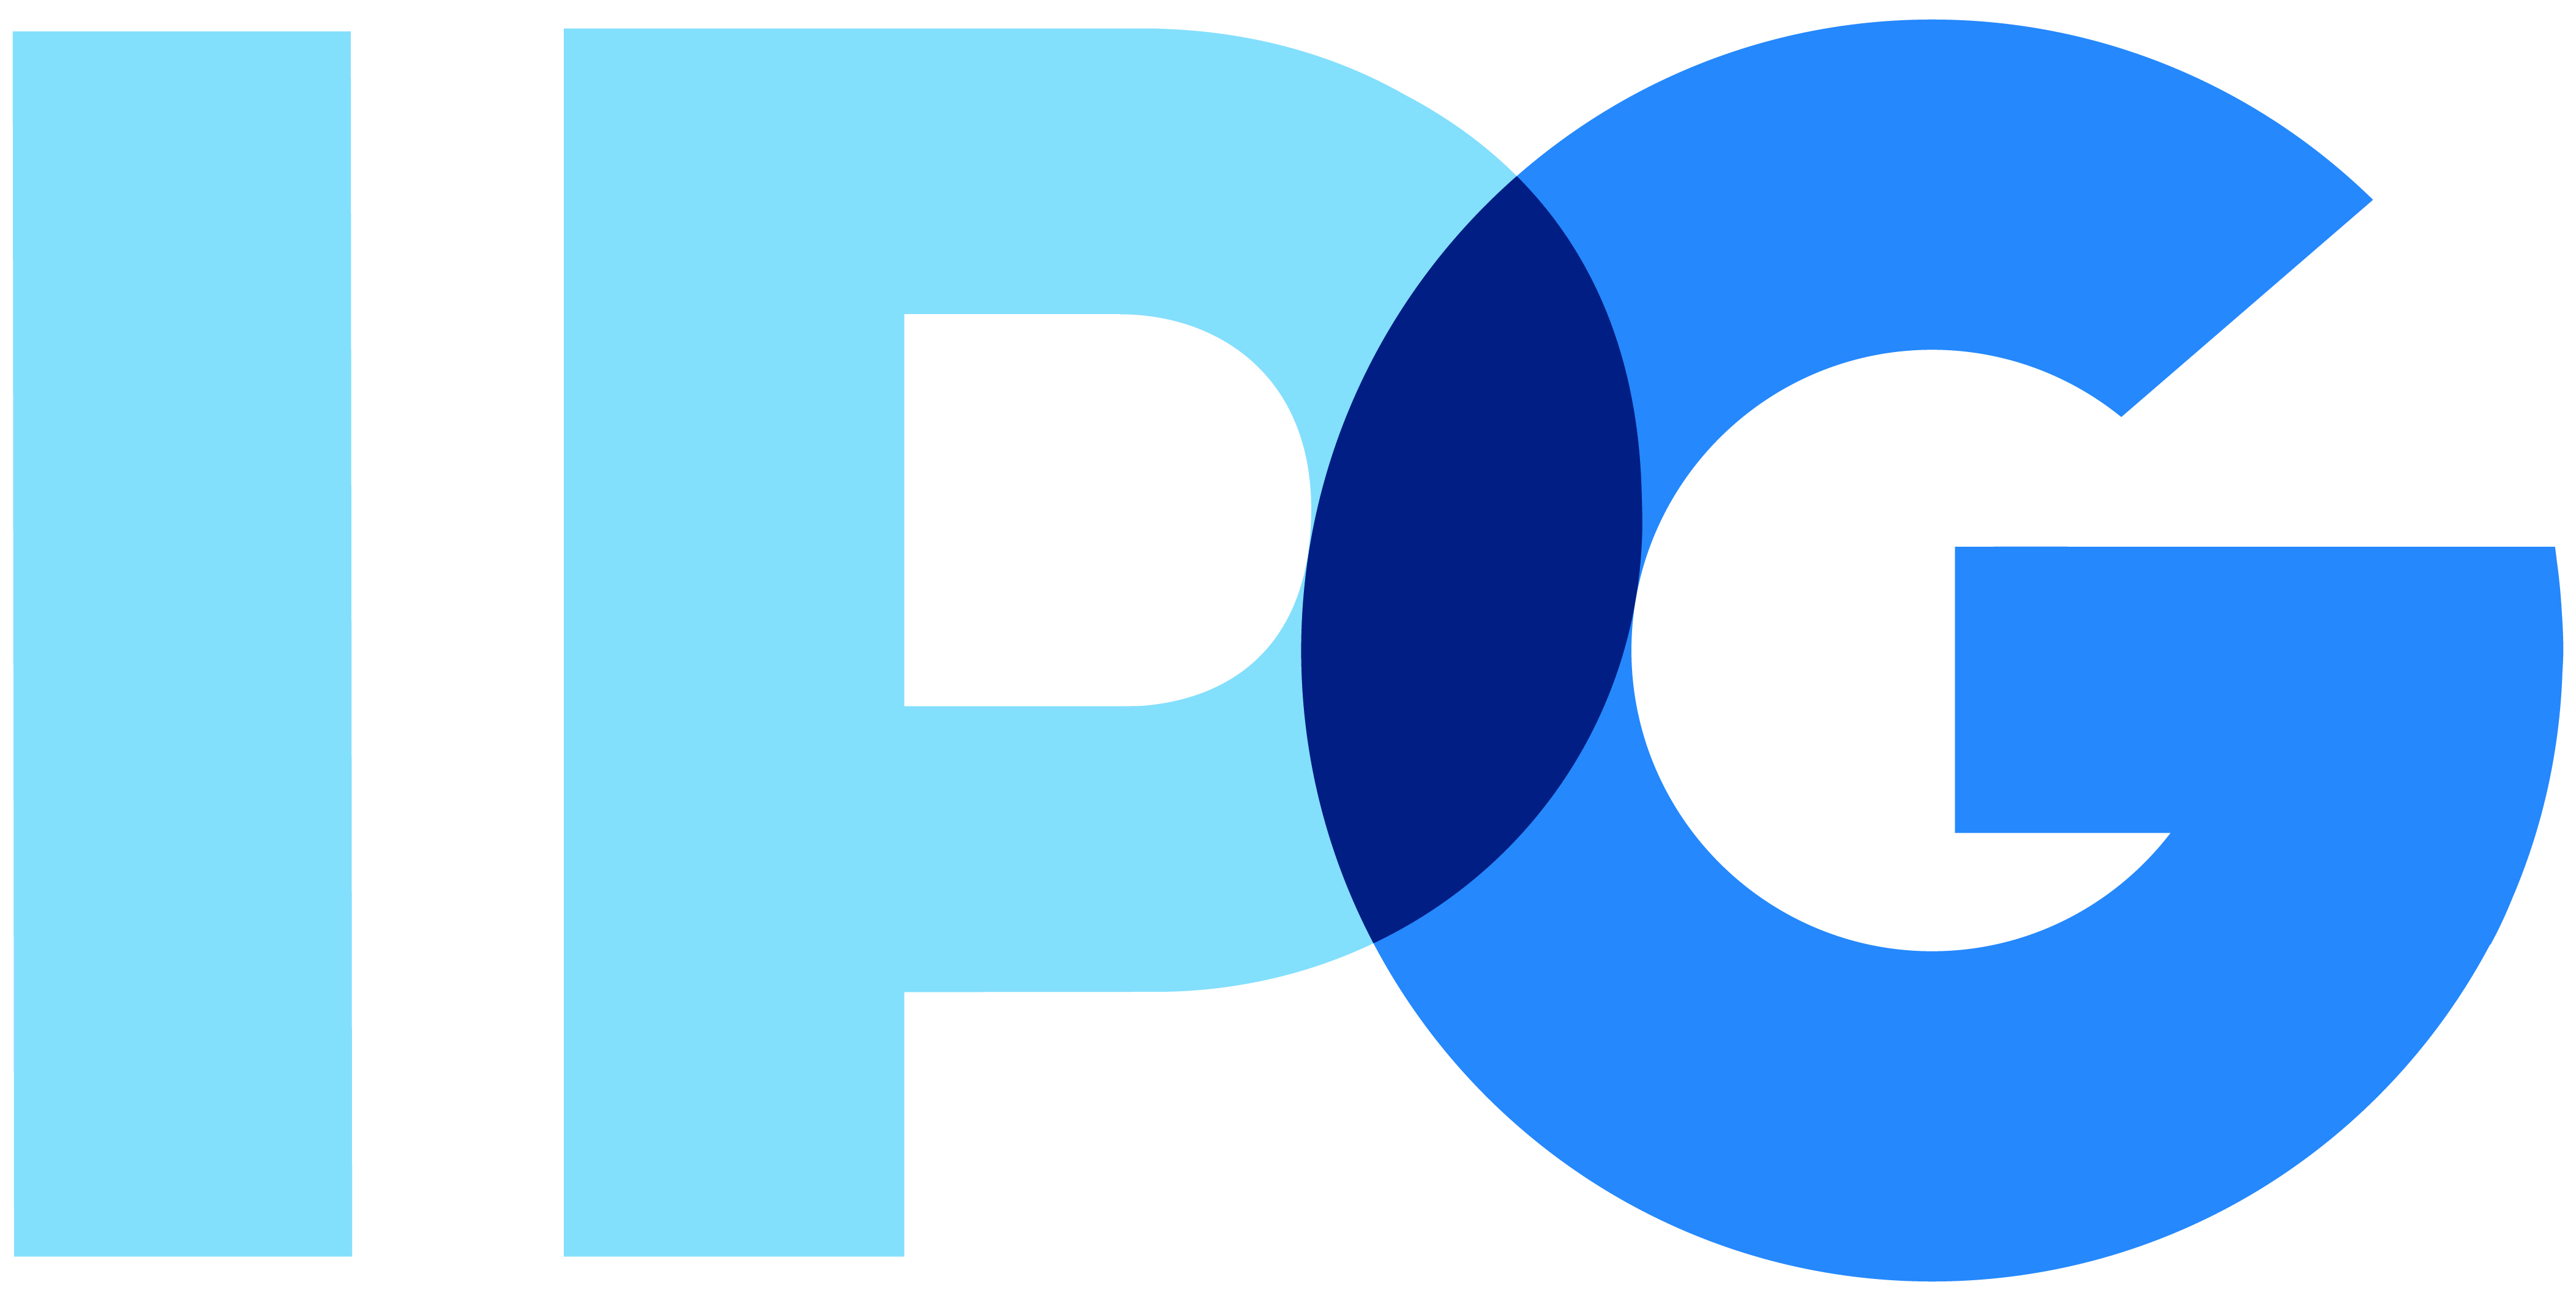 interpublic announces first quarter 2021 results what is finance cost in income statement